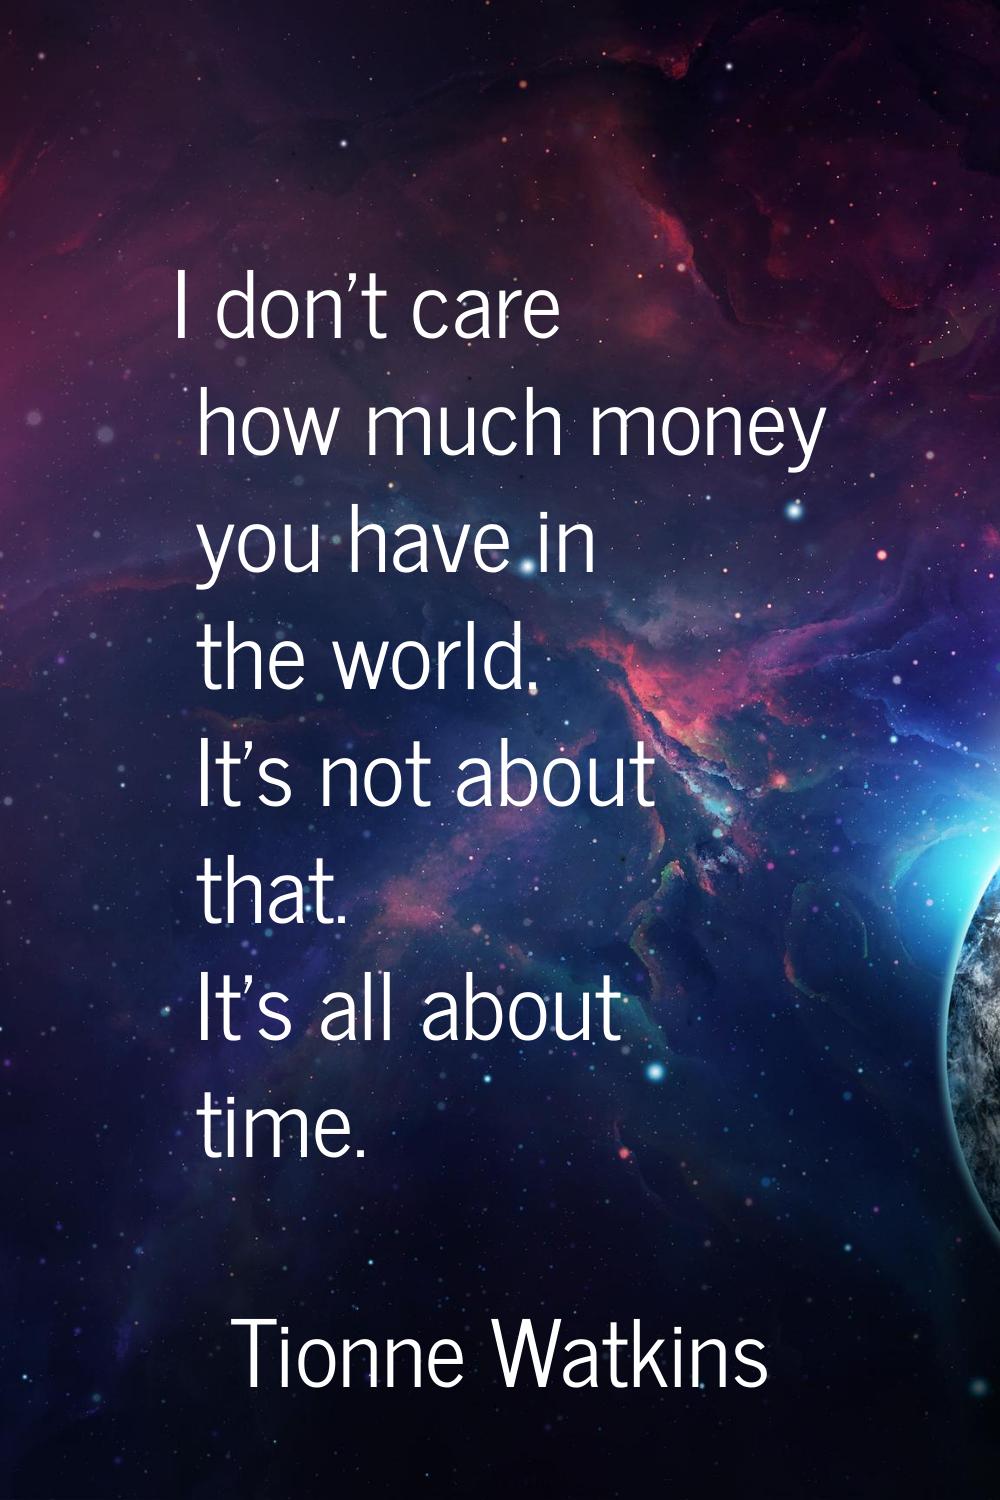 I don't care how much money you have in the world. It's not about that. It's all about time.